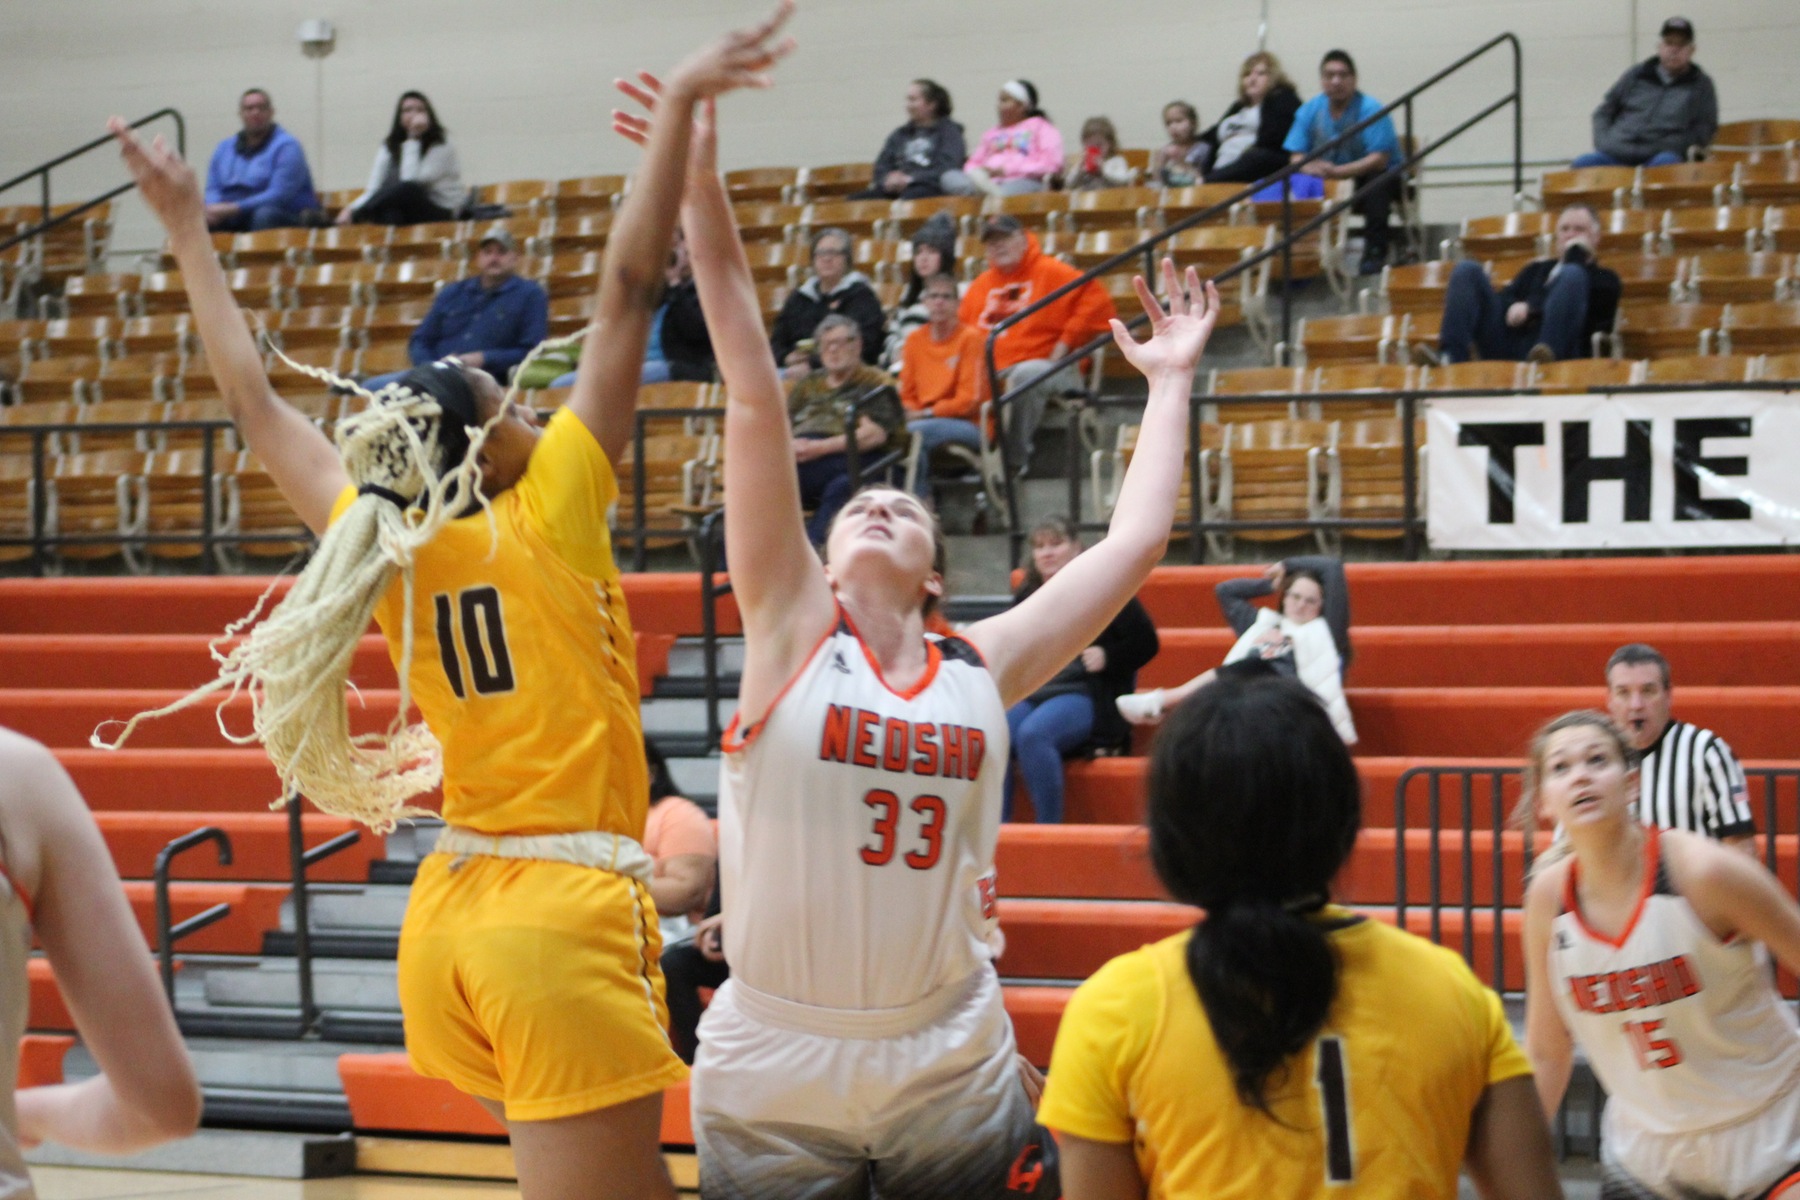 Garden City rips through Neosho; Harding earns first-career victory